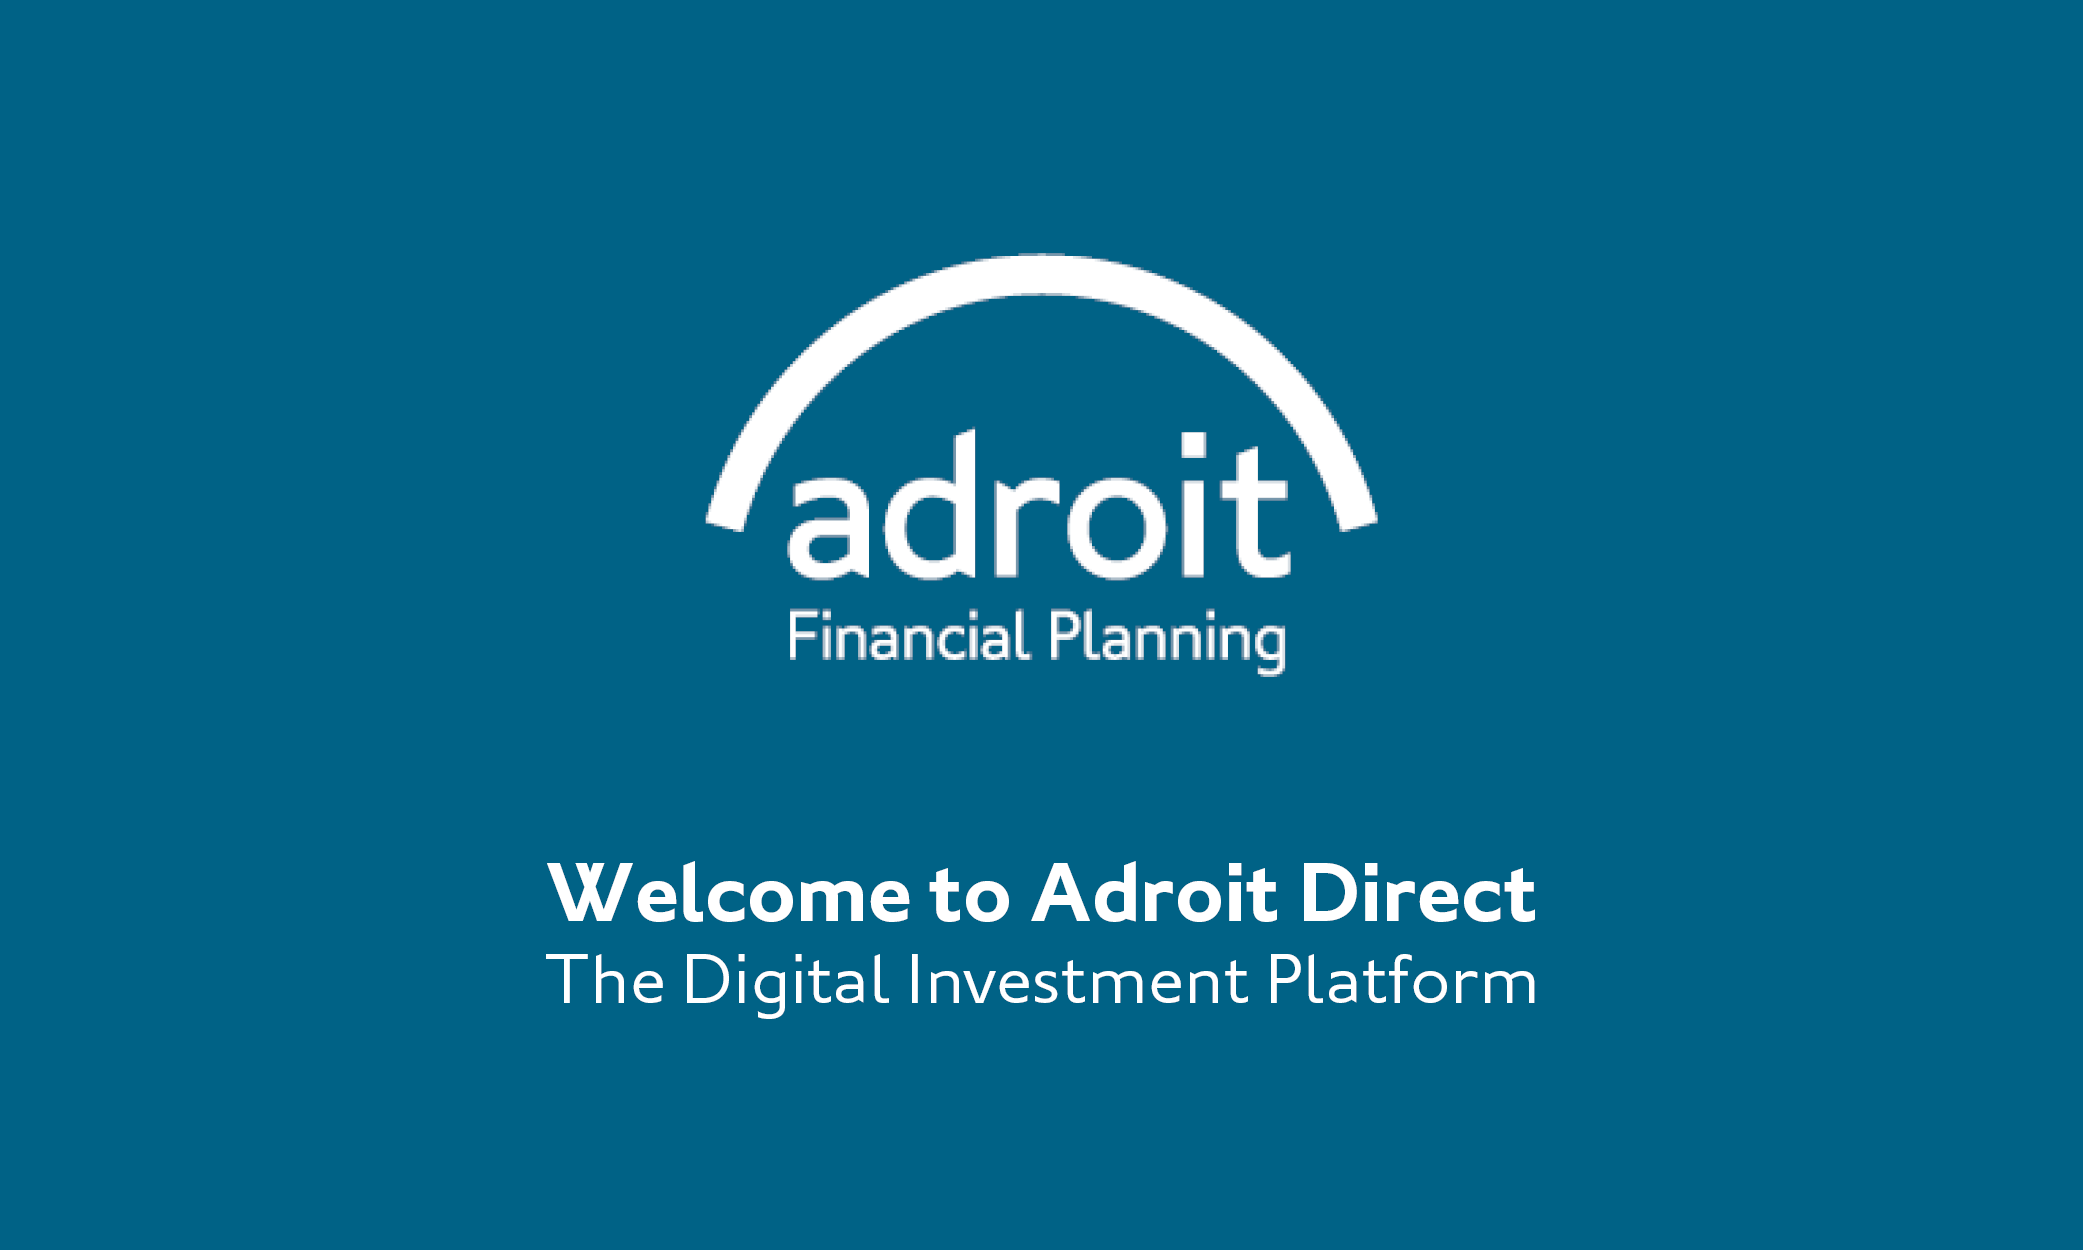 Adroit Direct - Welcome to Adroit Direct